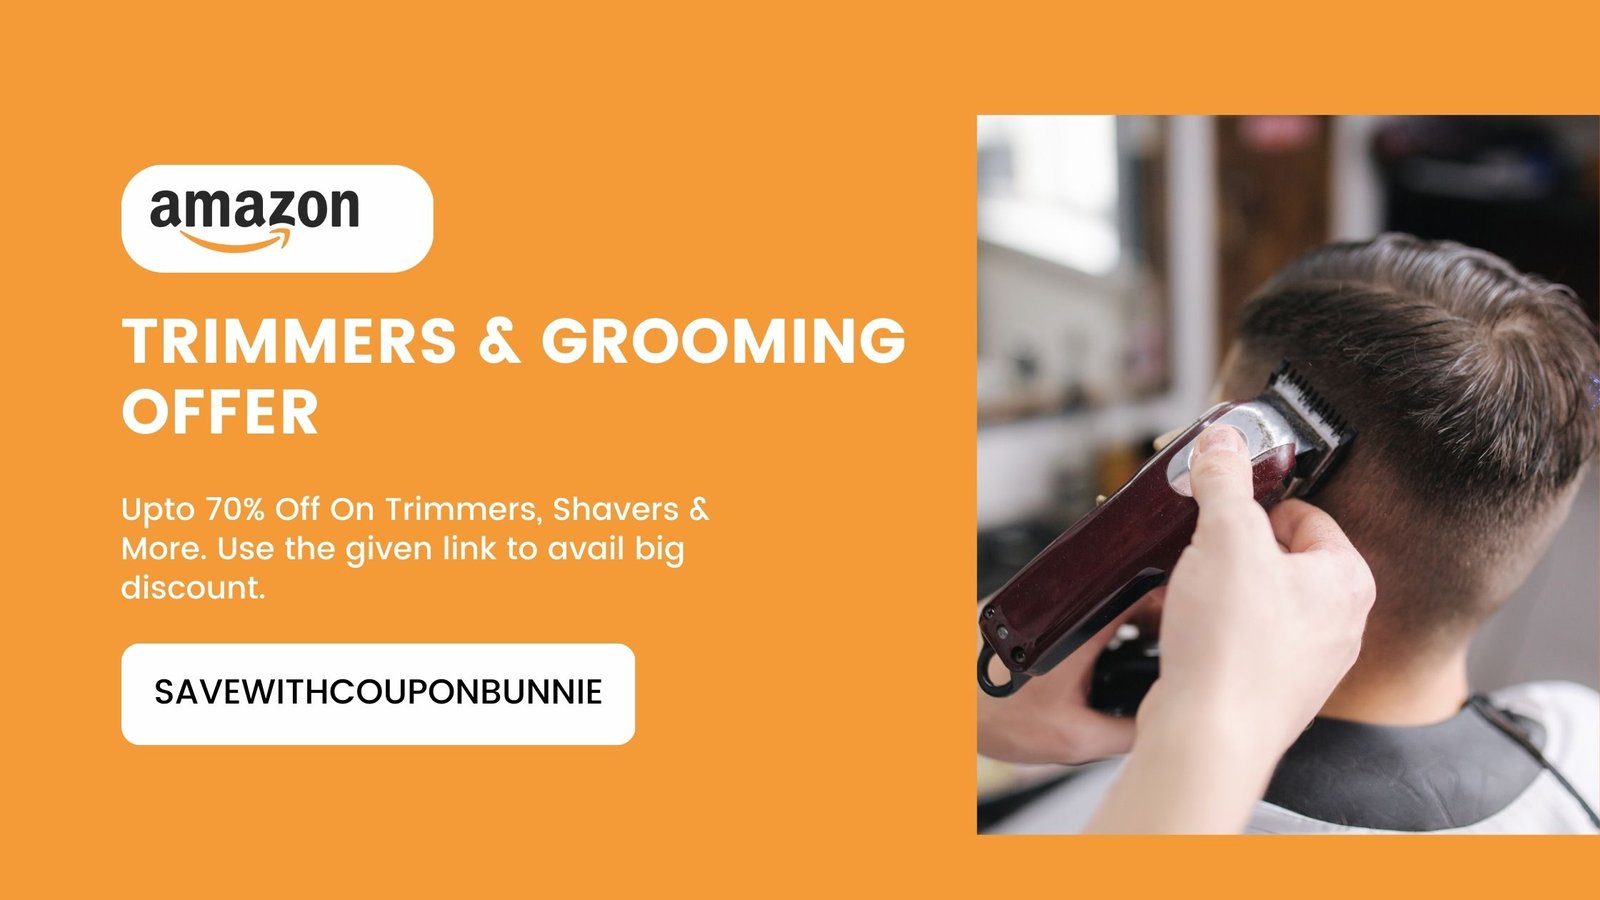 Amazon Trimmers & Grooming Offer